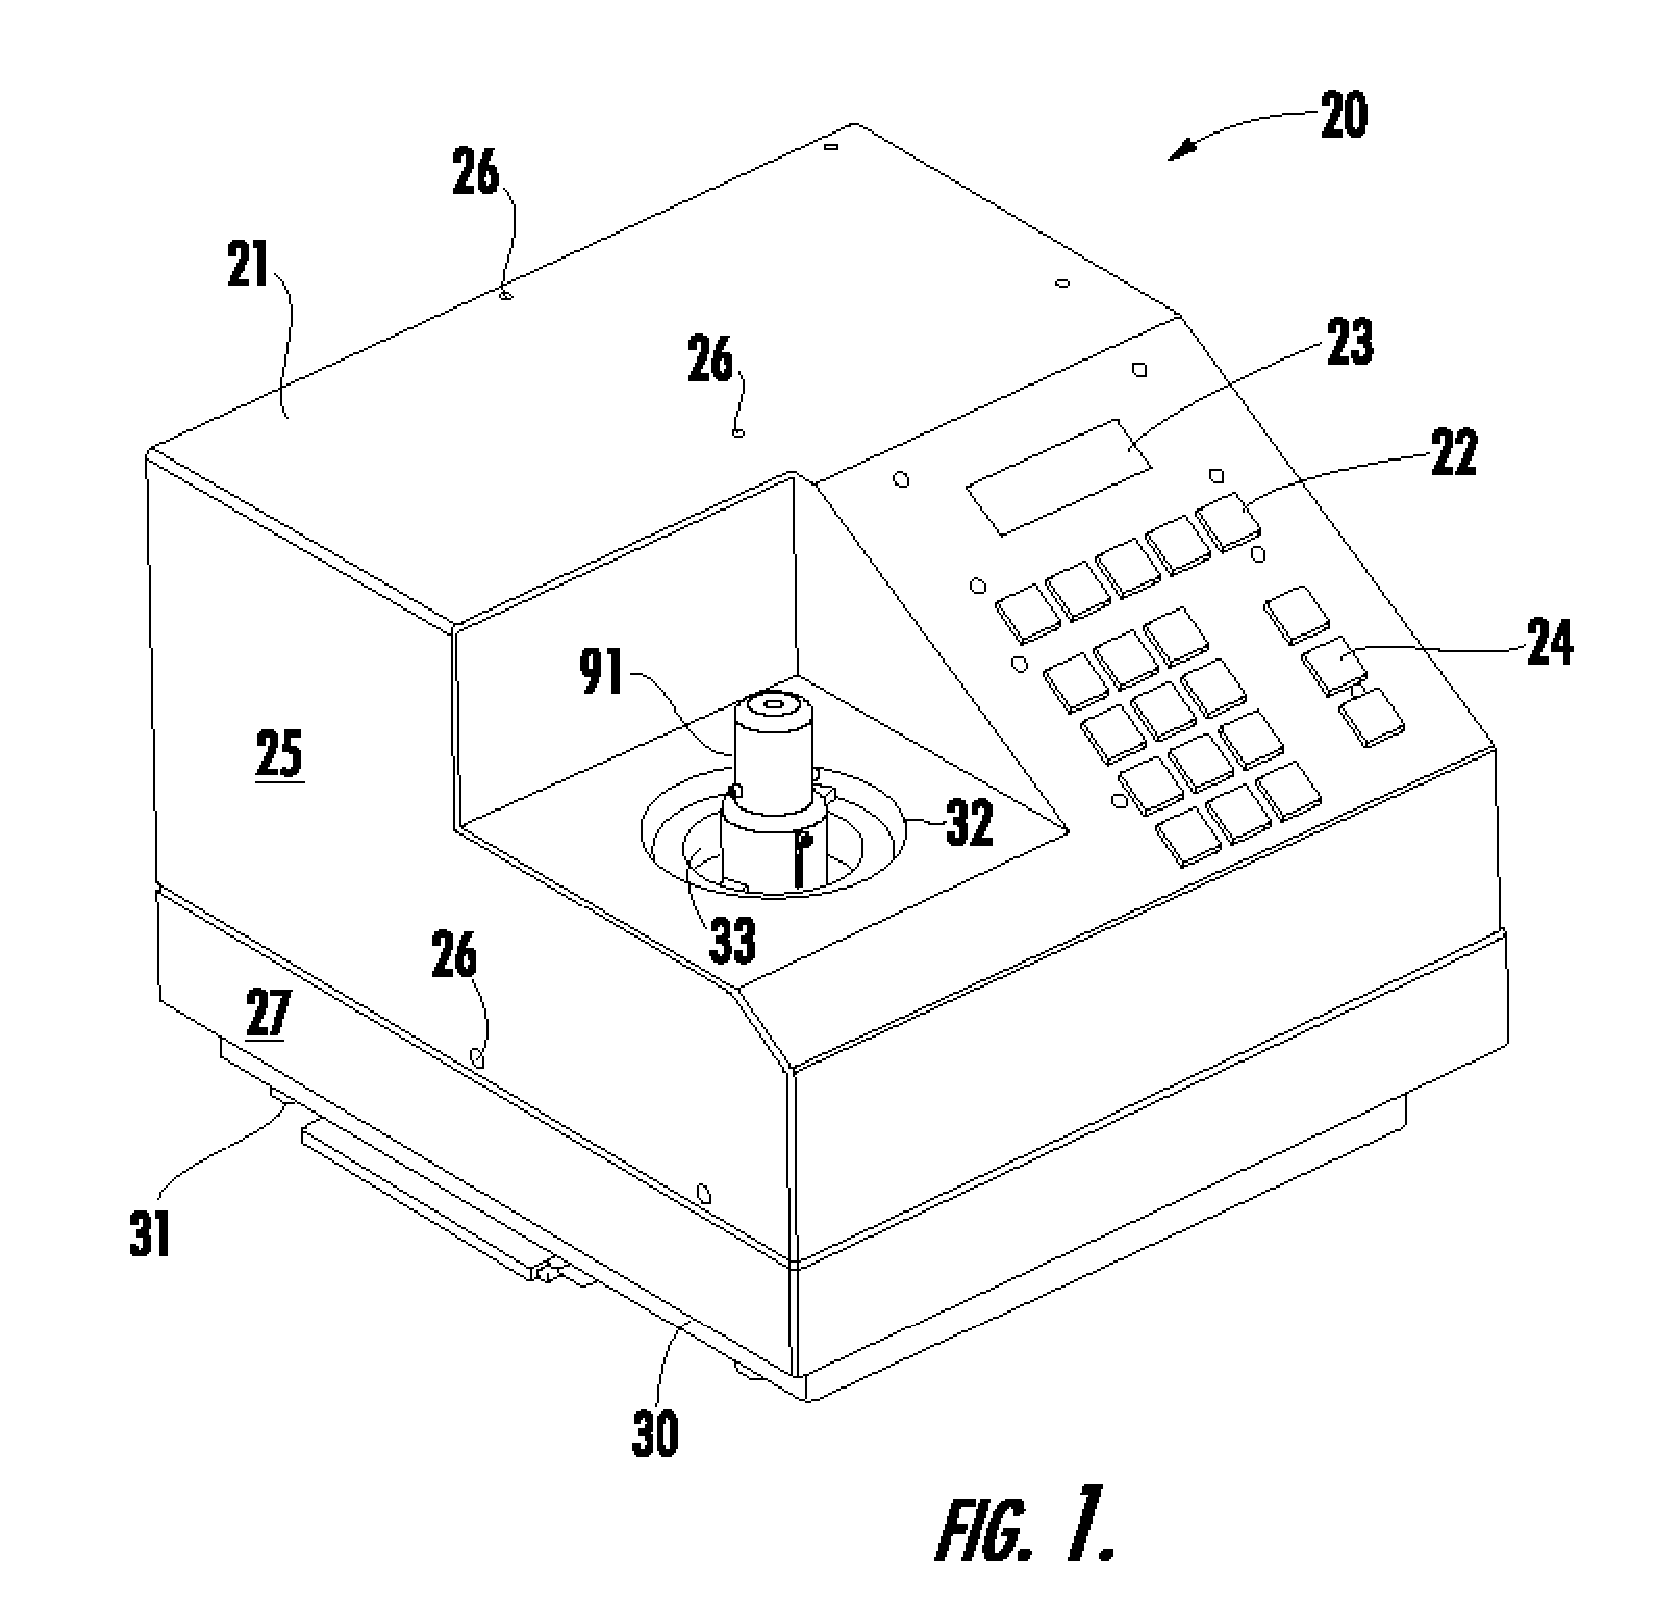 Microwave-Assisted Chemical Synthesis Instrument with Fixed Tuning